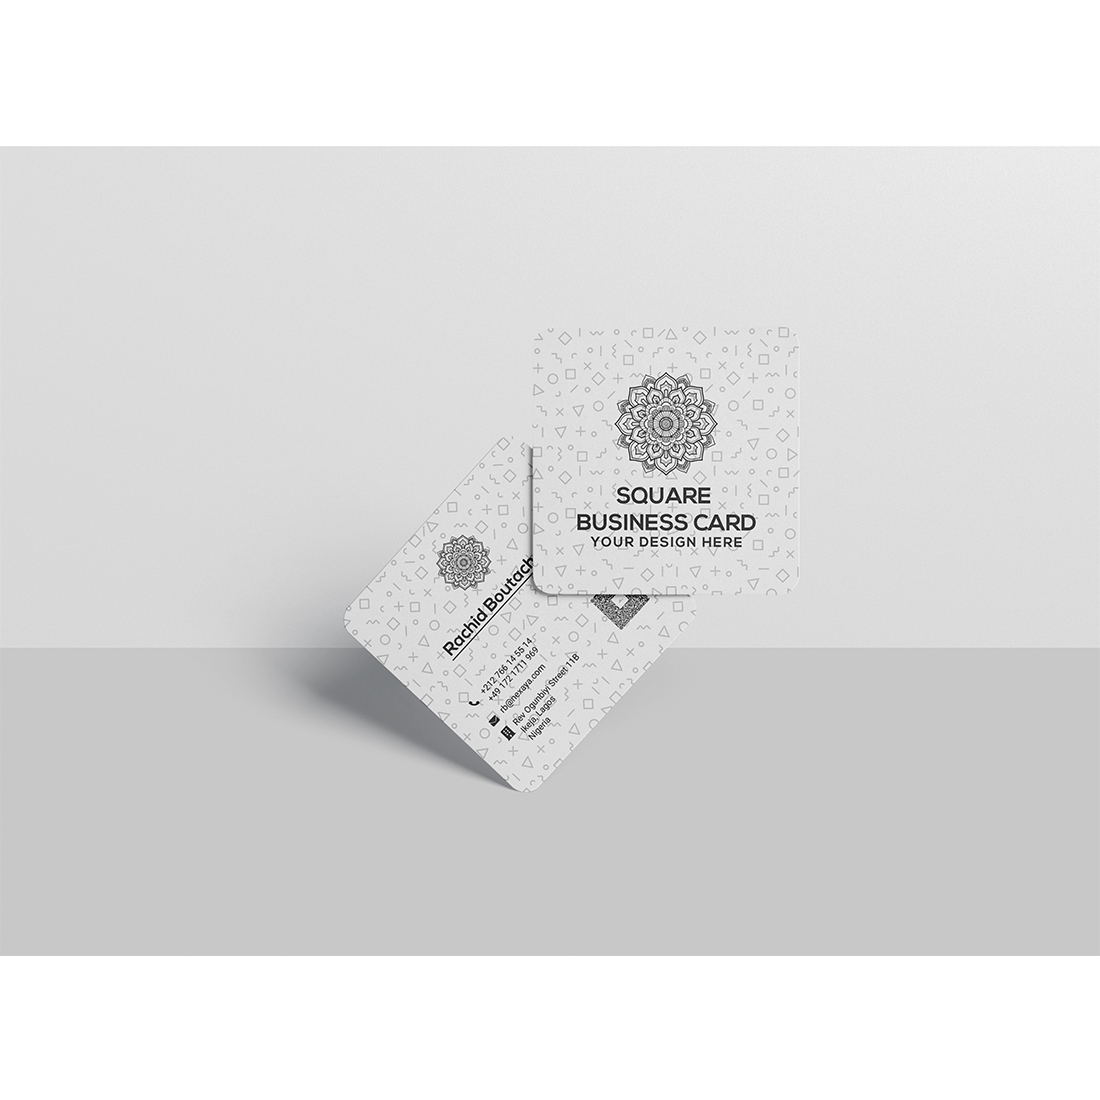 Square Round Corner Business Card Mockup preview image.